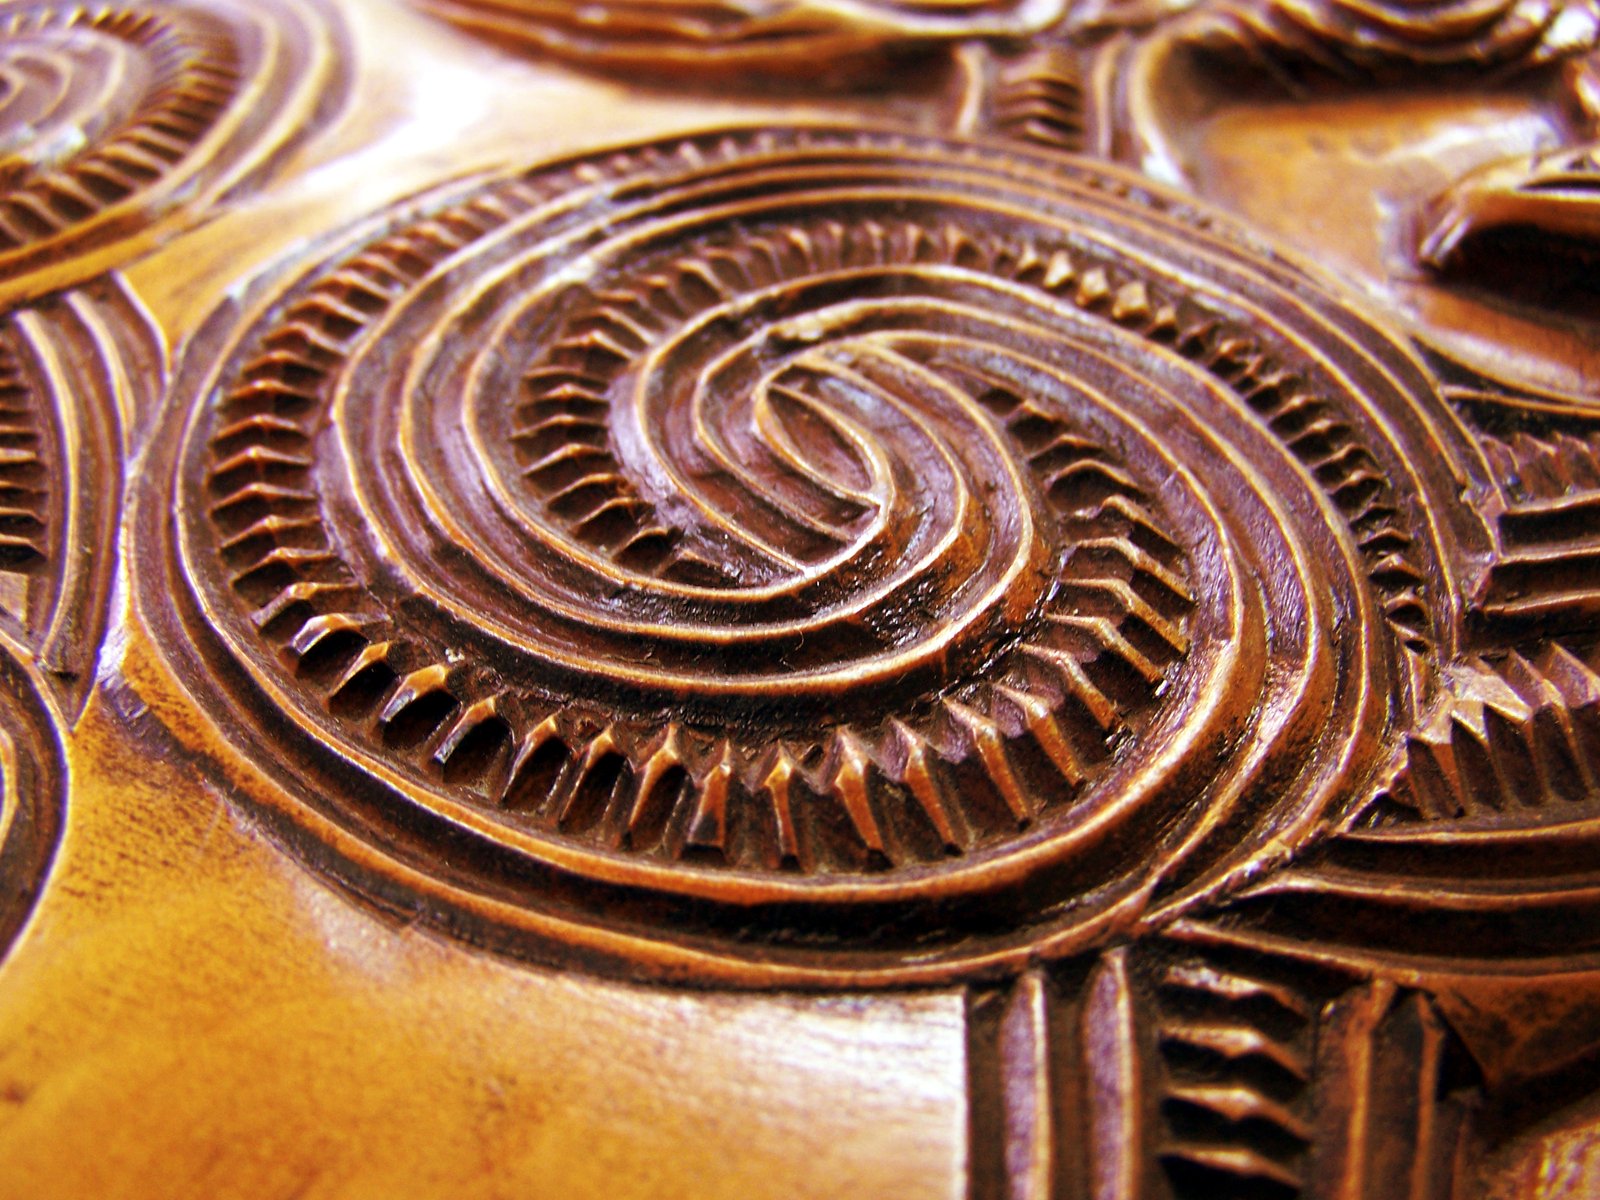 this is a wood carving with swirl designs on it